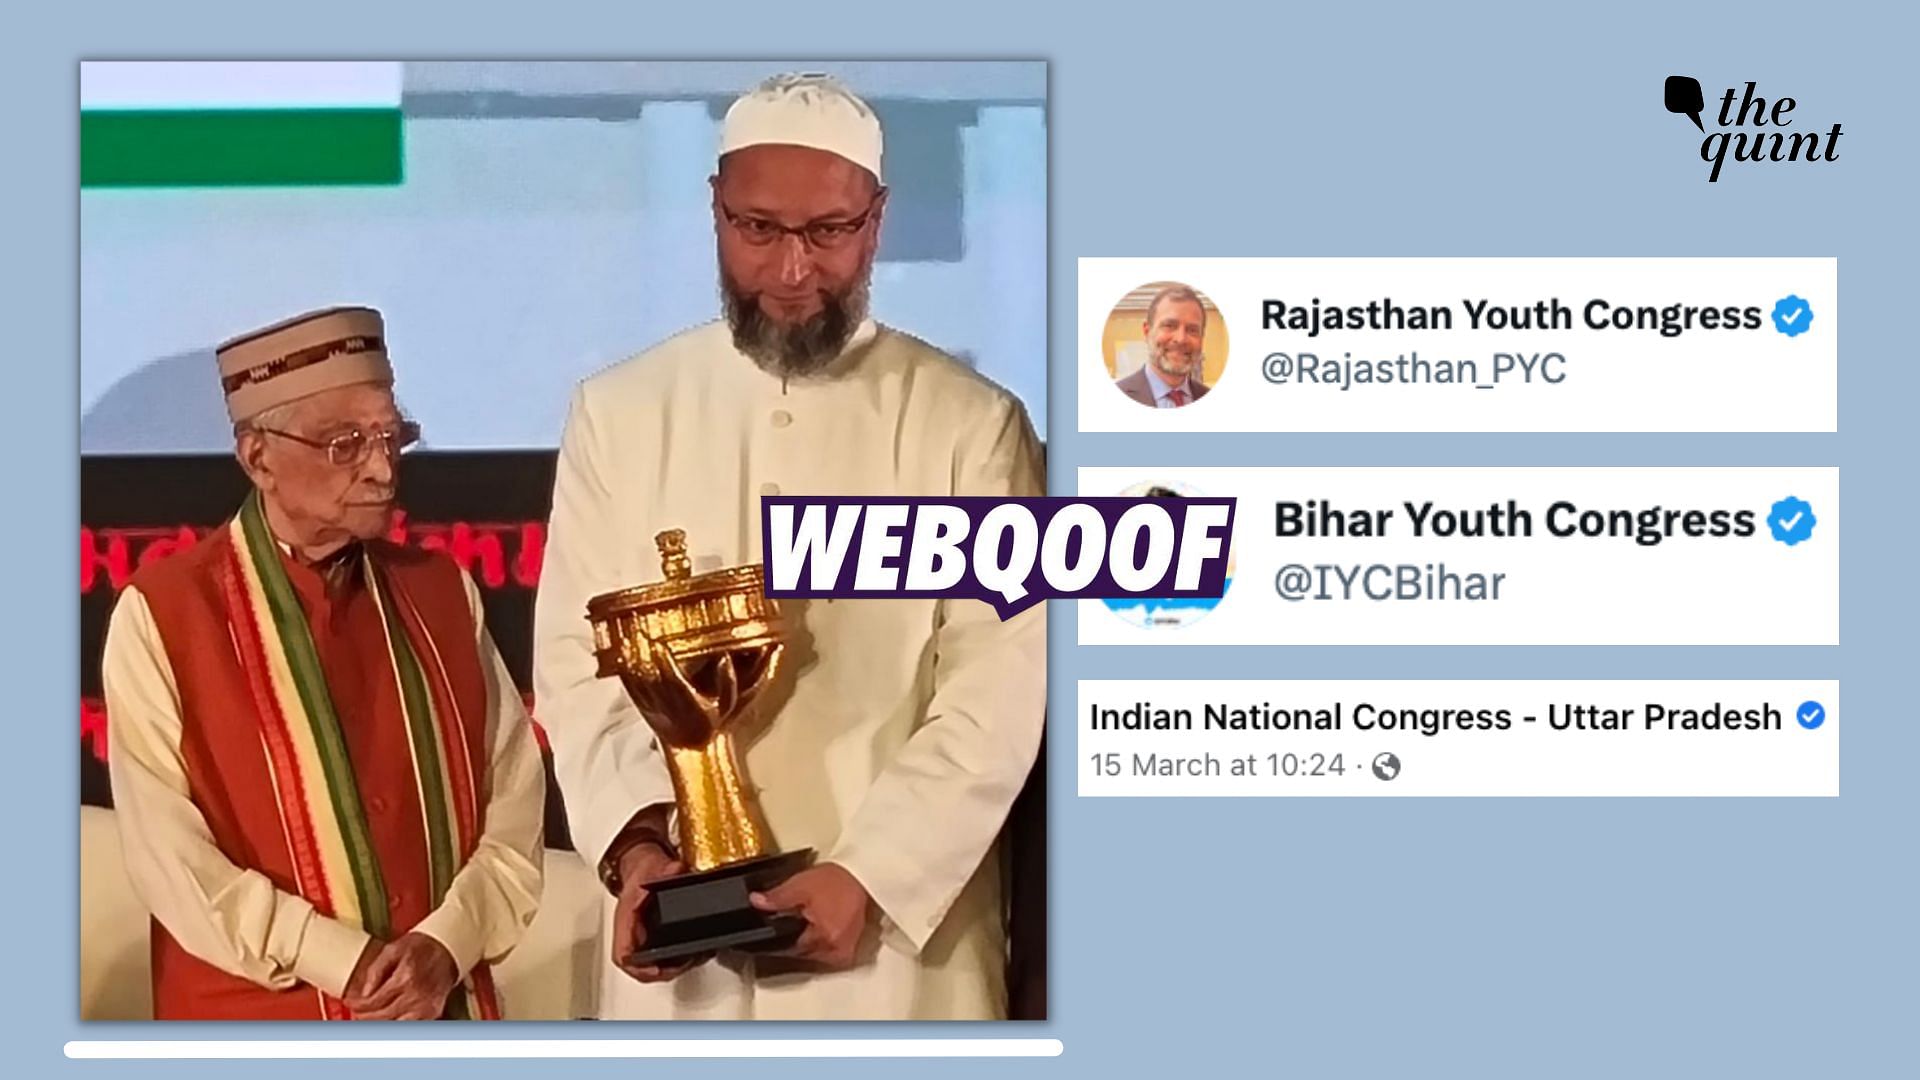 <div class="paragraphs"><p>The photo shows Owaisi at an event where he received an award from former President Ram Nath Kovind.</p></div>